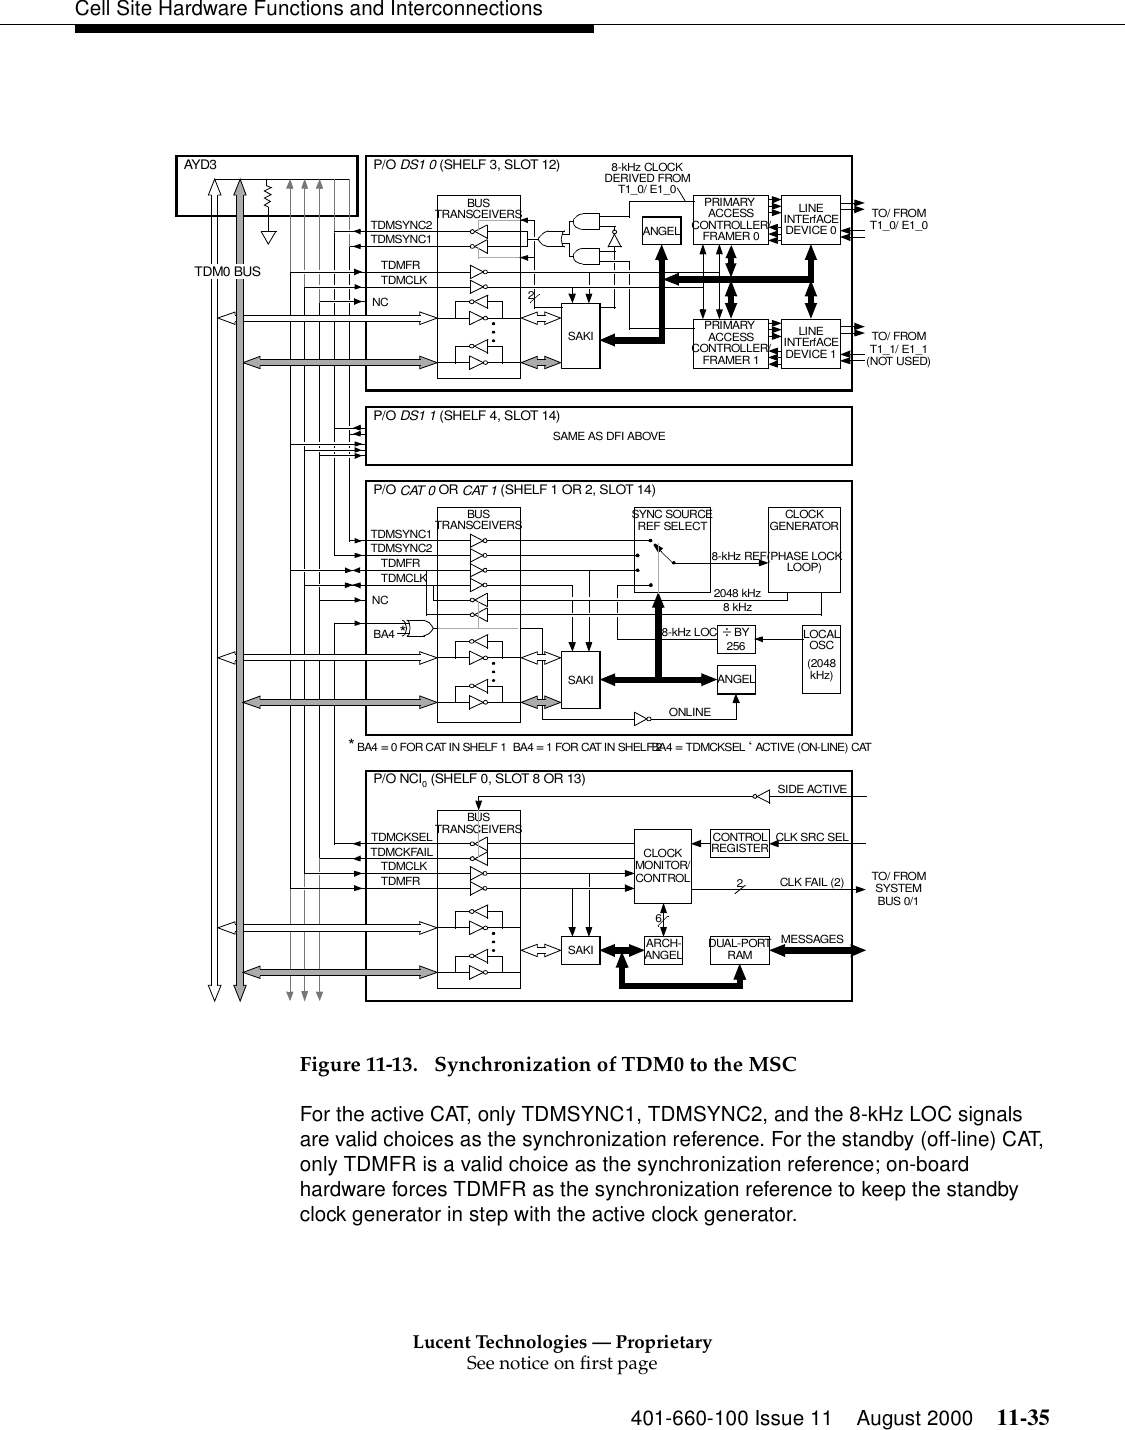 Lucent Technologies — ProprietarySee notice on first page401-660-100 Issue 11 August 2000 11-35Cell Site Hardware Functions and Interconnections Figure 11-13.  Synchronization of TDM0 to the MSCFor the active CAT, only TDMSYNC1, TDMSYNC2, and the 8-kHz LOC signals are valid choices as the synchronization reference. For the standby (off-line) CAT, only TDMFR is a valid choice as the synchronization reference; on-board hardware forces TDMFR as the synchronization reference to keep the standby clock generator in step with the active clock generator.BUSTRANSCEIVERSP/O DS1 0 (SHELF 3, SLOT 12)TDMSYNC1TDMSYNC2TDMFRTDMCLKTO/ FROMT1_0/ E1_0SAKILINEINTErfACEDEVICE 0ANGELTO/ FROMT1_1/ E1_18-kHz CLOCKDERIVED FROMT1_0/ E1_0BUSTRANSCEIVERSP/O CAT 0 OR CAT 1 (SHELF 1 OR 2, SLOT 14)TDMSYNC2TDMSYNC1TDMFRTDMCLKANGELSAKIBA4 *NCSYNC SOURCEREF SELECTLOCALOSCCLOCKGENERATOR(PHASE LOCKLOOP)8-kHz REF8-kHz LOC÷ BY256(2048kHz)2048 kHz8 kHzBUSTRANSCEIVERSDUAL-PORTRAMCLOCKMONITOR/CONTROLMESSAGESP/O NCI0 (SHELF 0, SLOT 8 OR 13)TDMCKFAILTDMCKSELTDMCLKSIDE ACTIVECLK SRC SELCLK FAIL (2)TDMFRSAKITO/ FROMSYSTEM2BUS 0/1P/O DS1 1 (SHELF 4, SLOT 14)SAME AS DFI ABOVENCLINEINTErfACEDEVICE 1PRIMARY ACCESSCONTROLLER/FRAMER 0PRIMARY ACCESSCONTROLLER/FRAMER 1AYD3TDM0 BUS2ONLINE* BA4 = 0 FOR CAT IN SHELF 1  BA4 = 1 FOR CAT IN SHELF 2BA4 = TDMCKSEL ‘ ACTIVE (ON-LINE) CATCONTROLREGISTER6(NOT USED)ARCH-ANGEL